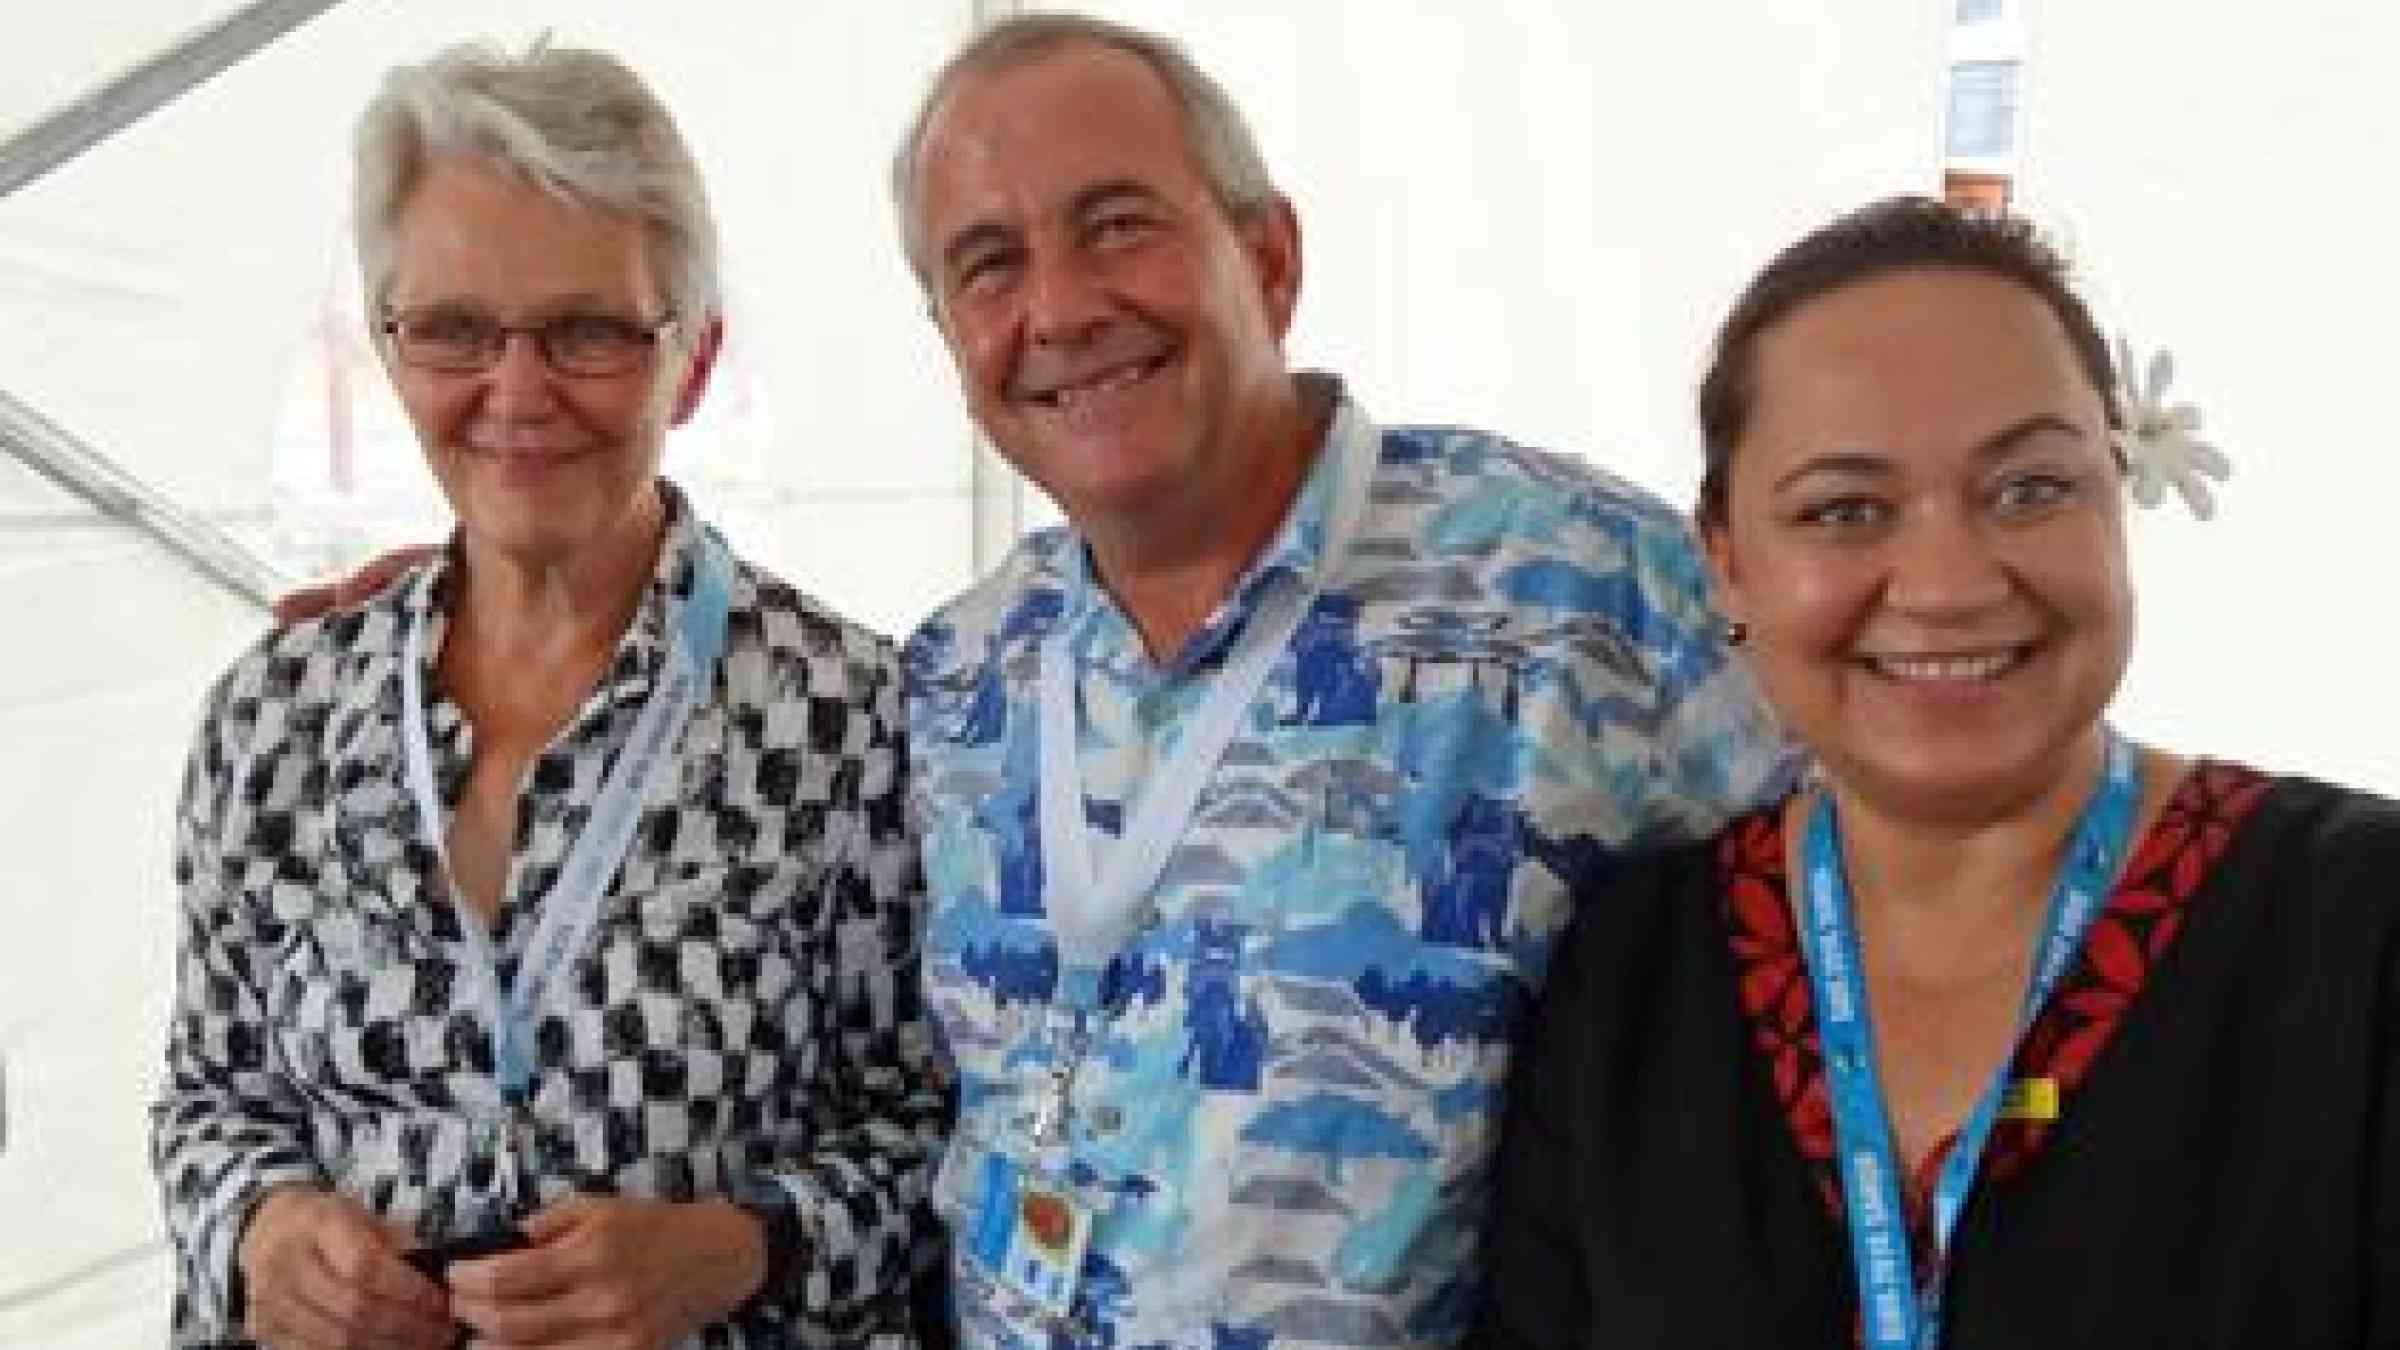 UNISDR chief, Margareta Wahlstrom with and Mr David Sheppard, SPREP Director General and Talgaloa Cooper Halo, SPREP Climate Change Advisor. SPREP is Secretariat of Pacific Regional Environment Programme and one of our core partners in the region of for the Pacific Regional Strategy for Climate and Disaster Resilient Development. (Photo: Timothy Wilcox/UNISDR)